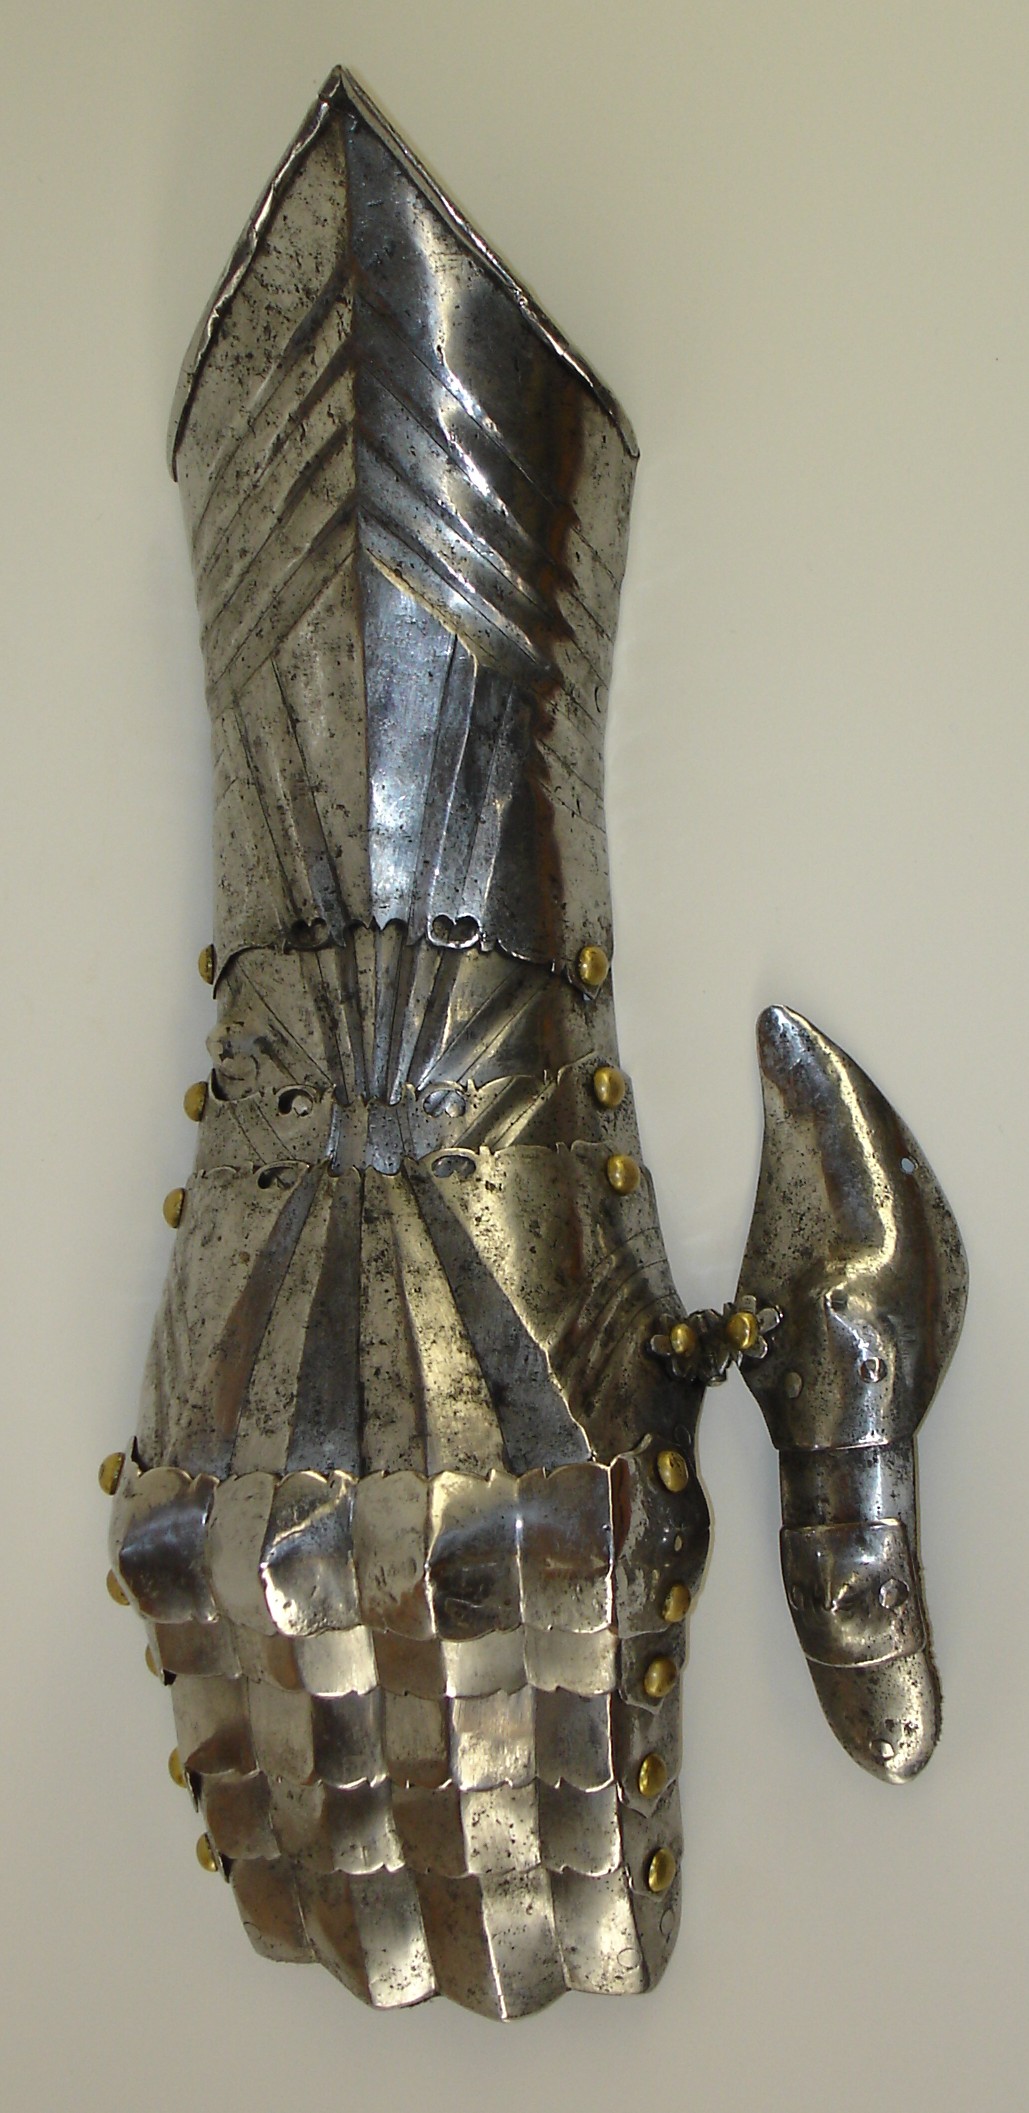 Gauntlets - A-98-right